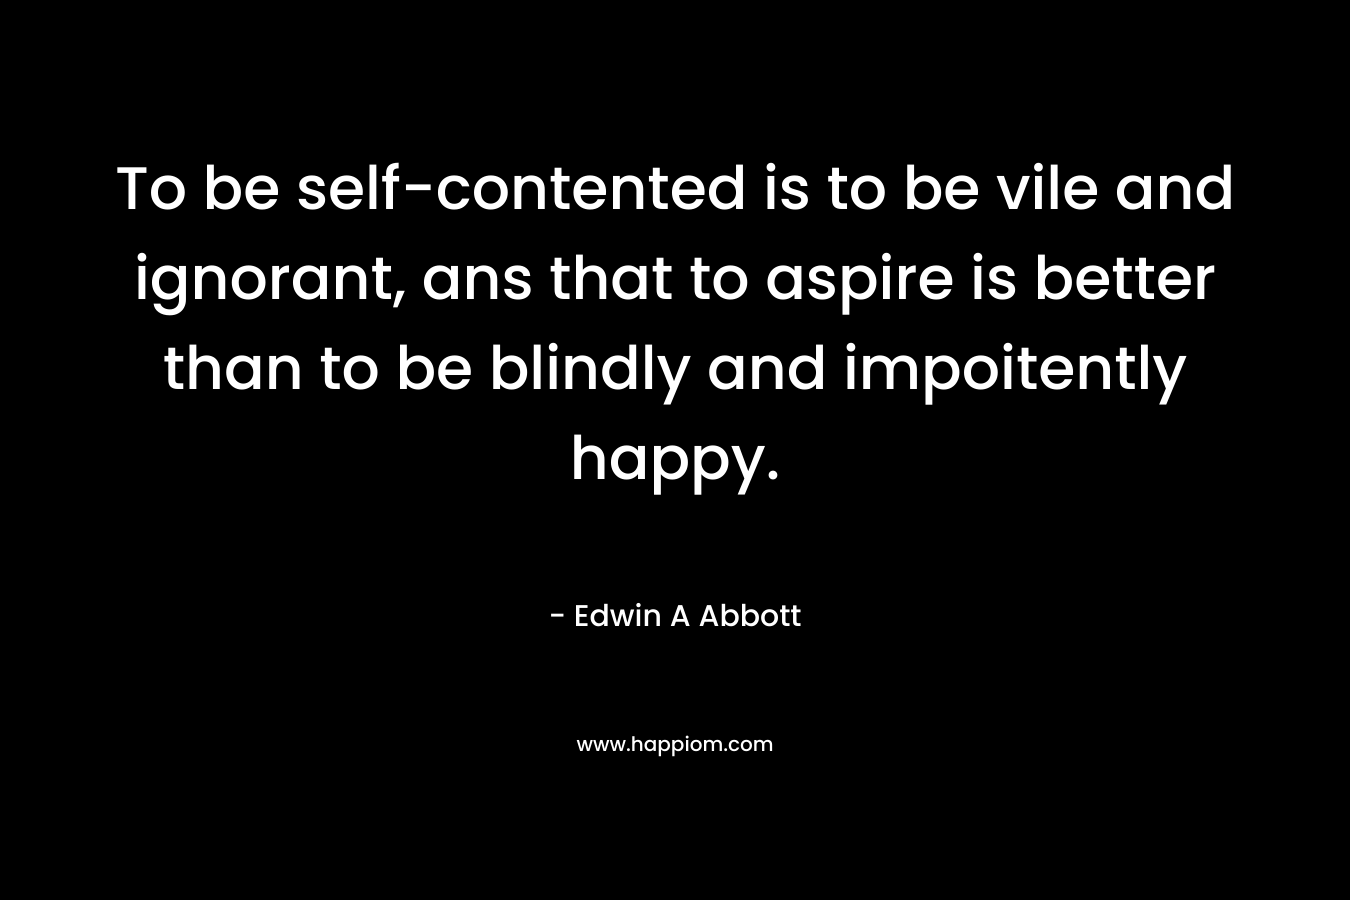 To be self-contented is to be vile and ignorant, ans that to aspire is better than to be blindly and impoitently happy.